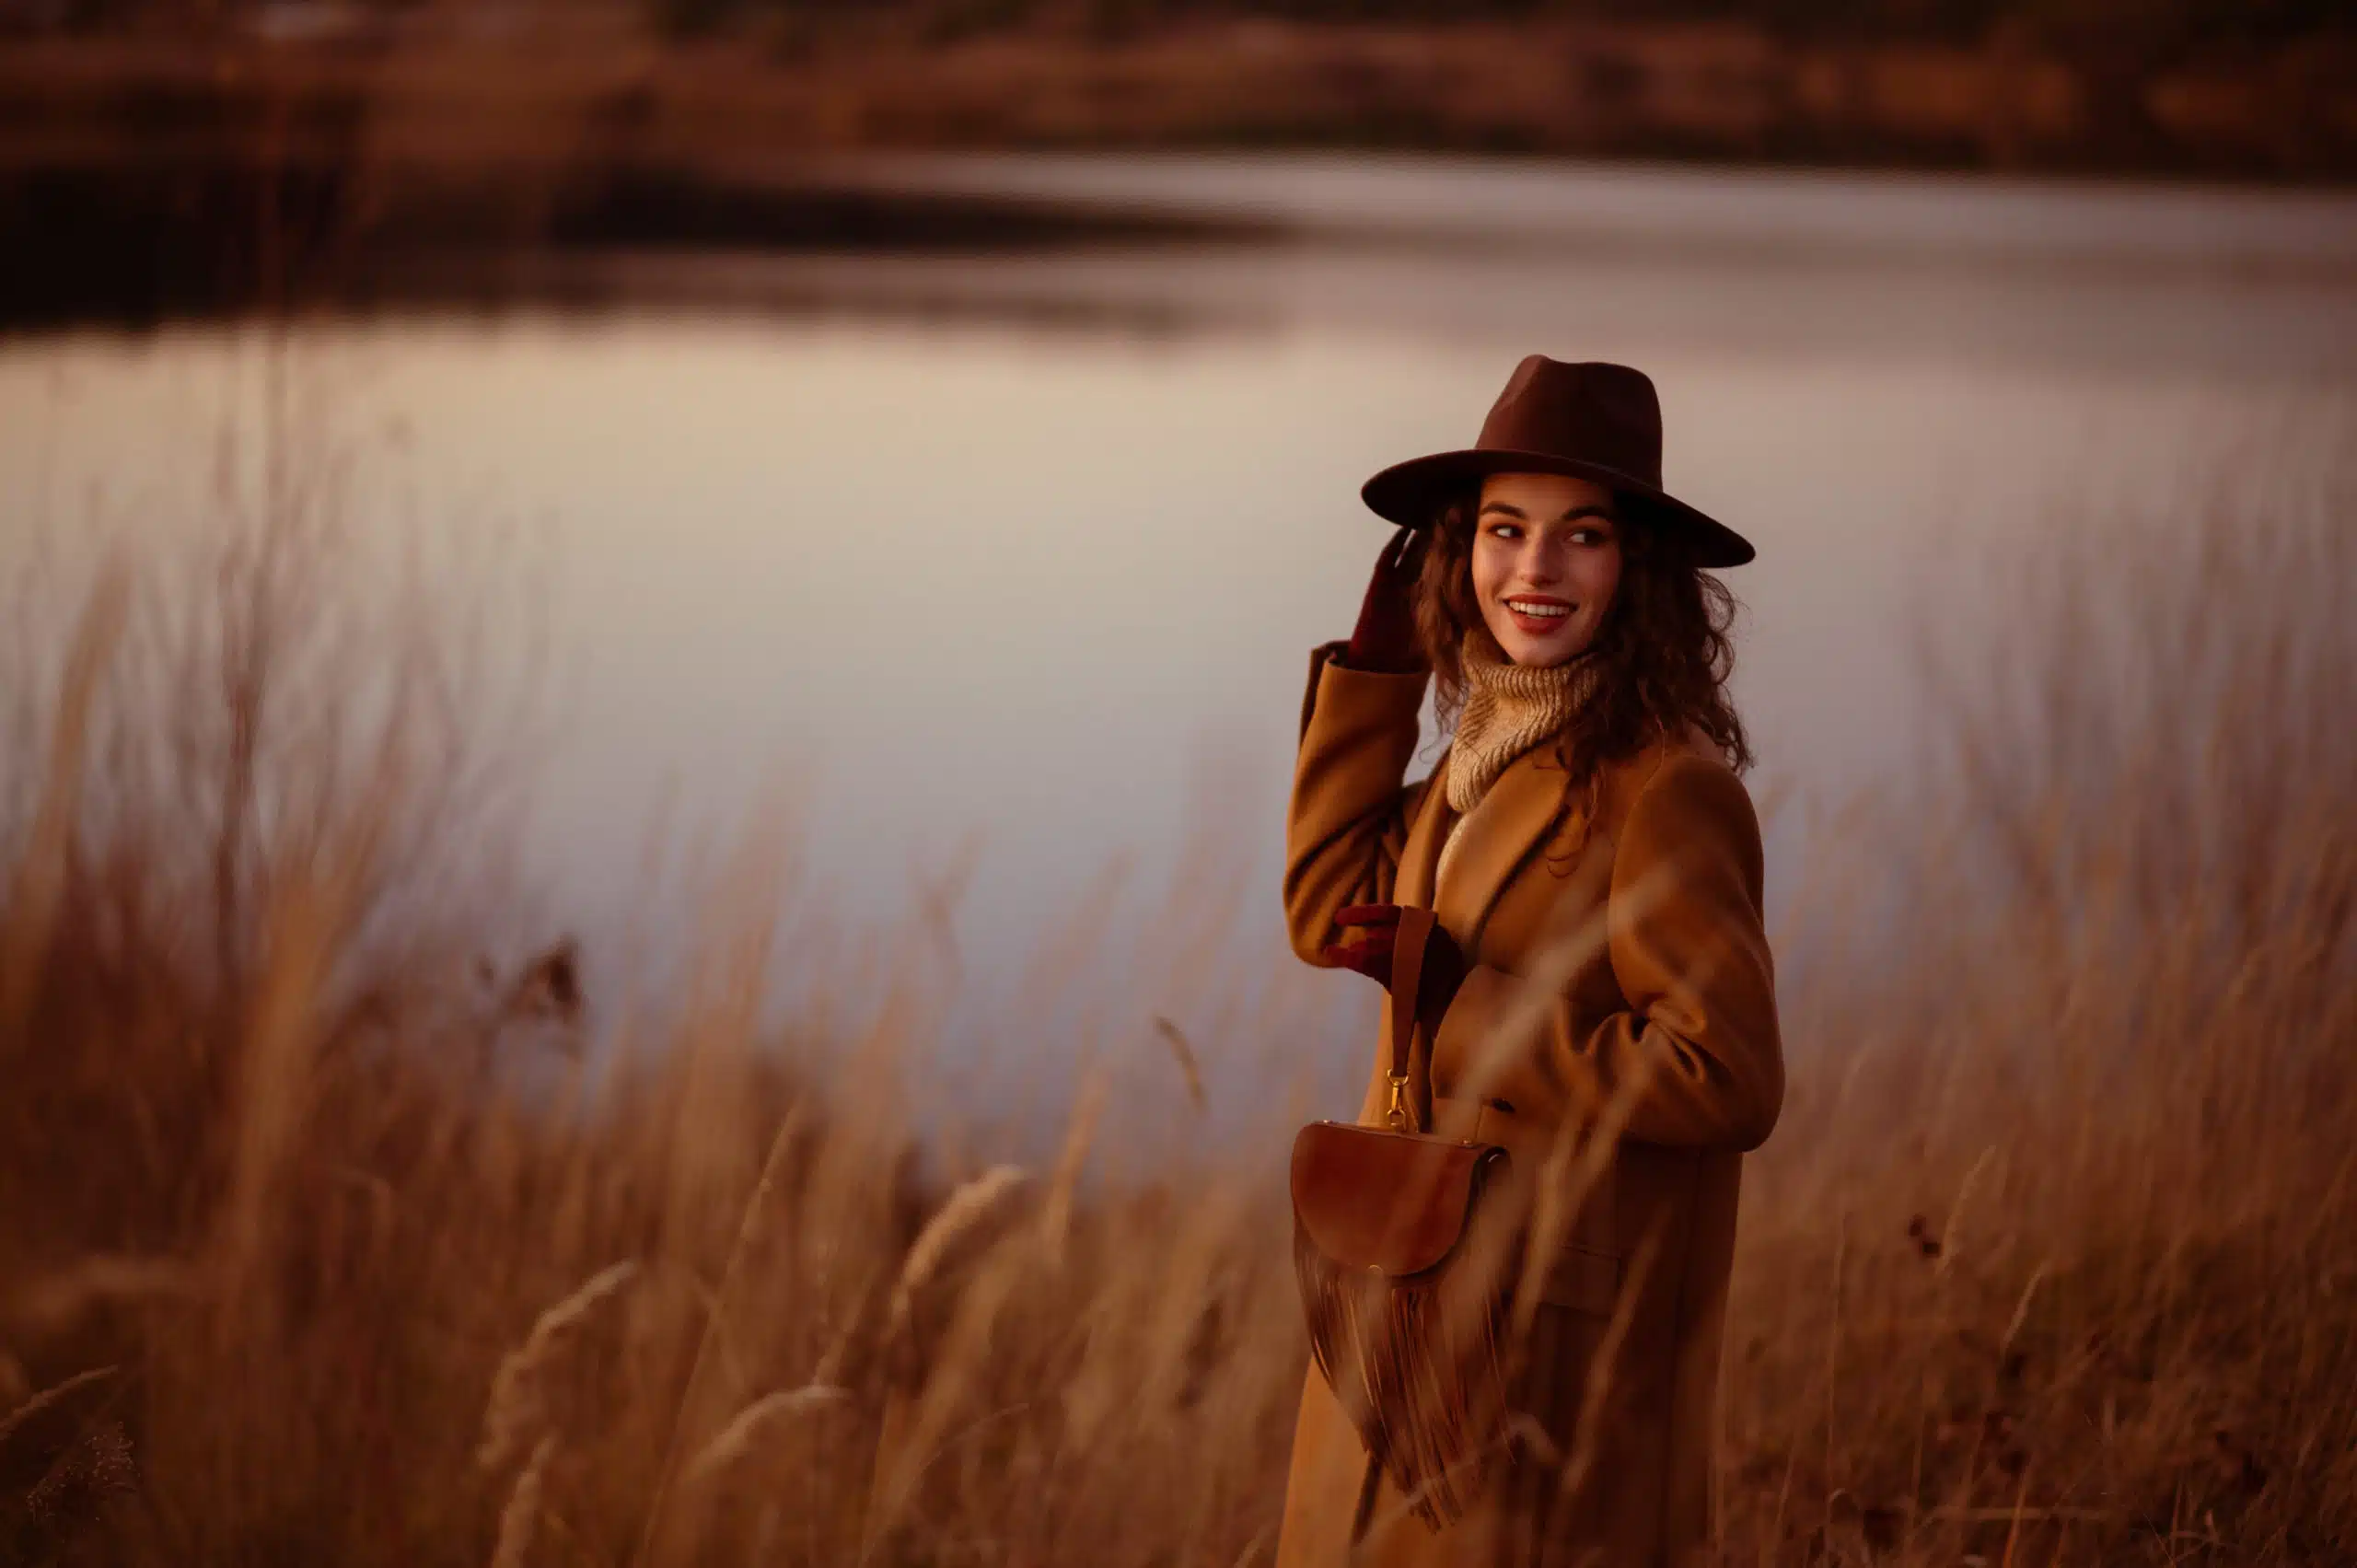 Standing in the grasses by the lake, a happy smiling elegant woman wearing a brown hat and coat.